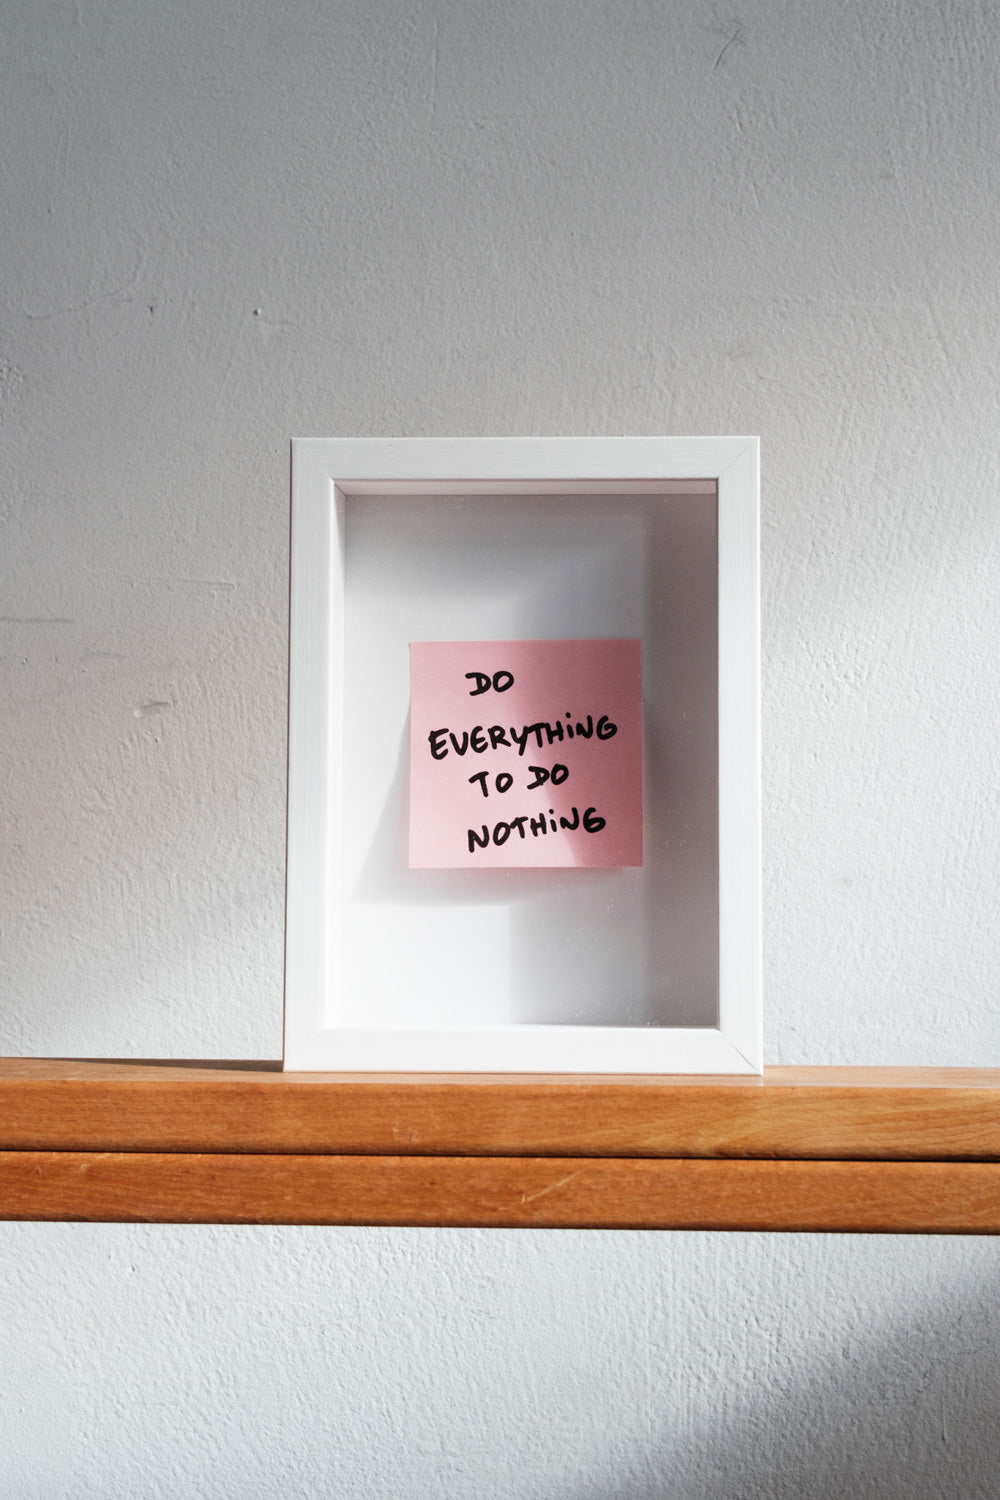 Art: Silkprint on Post-it® : DO EVERYTHING TO DO NOTHING (PINK)